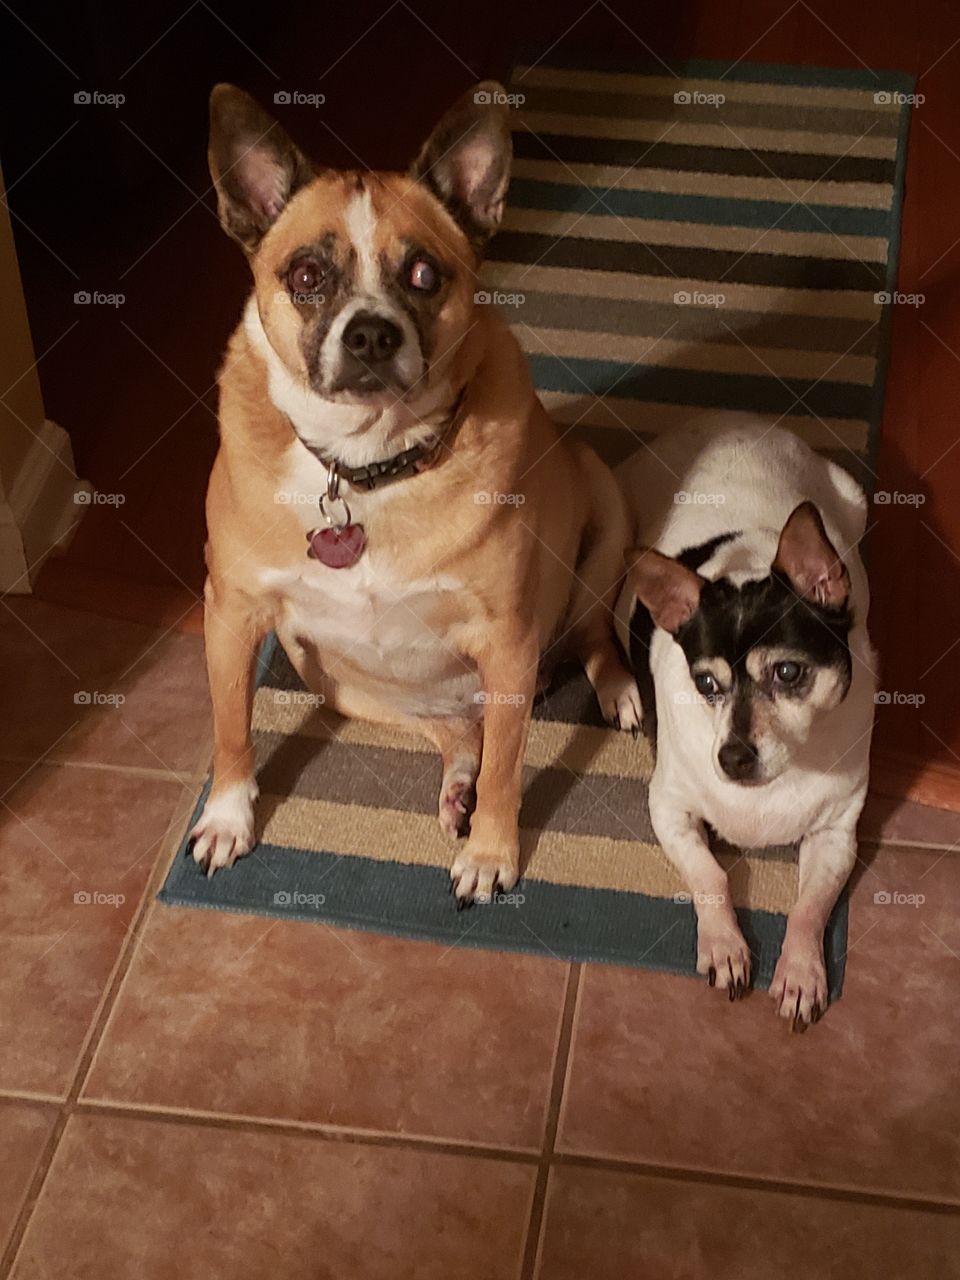 We are waiting for our treats !